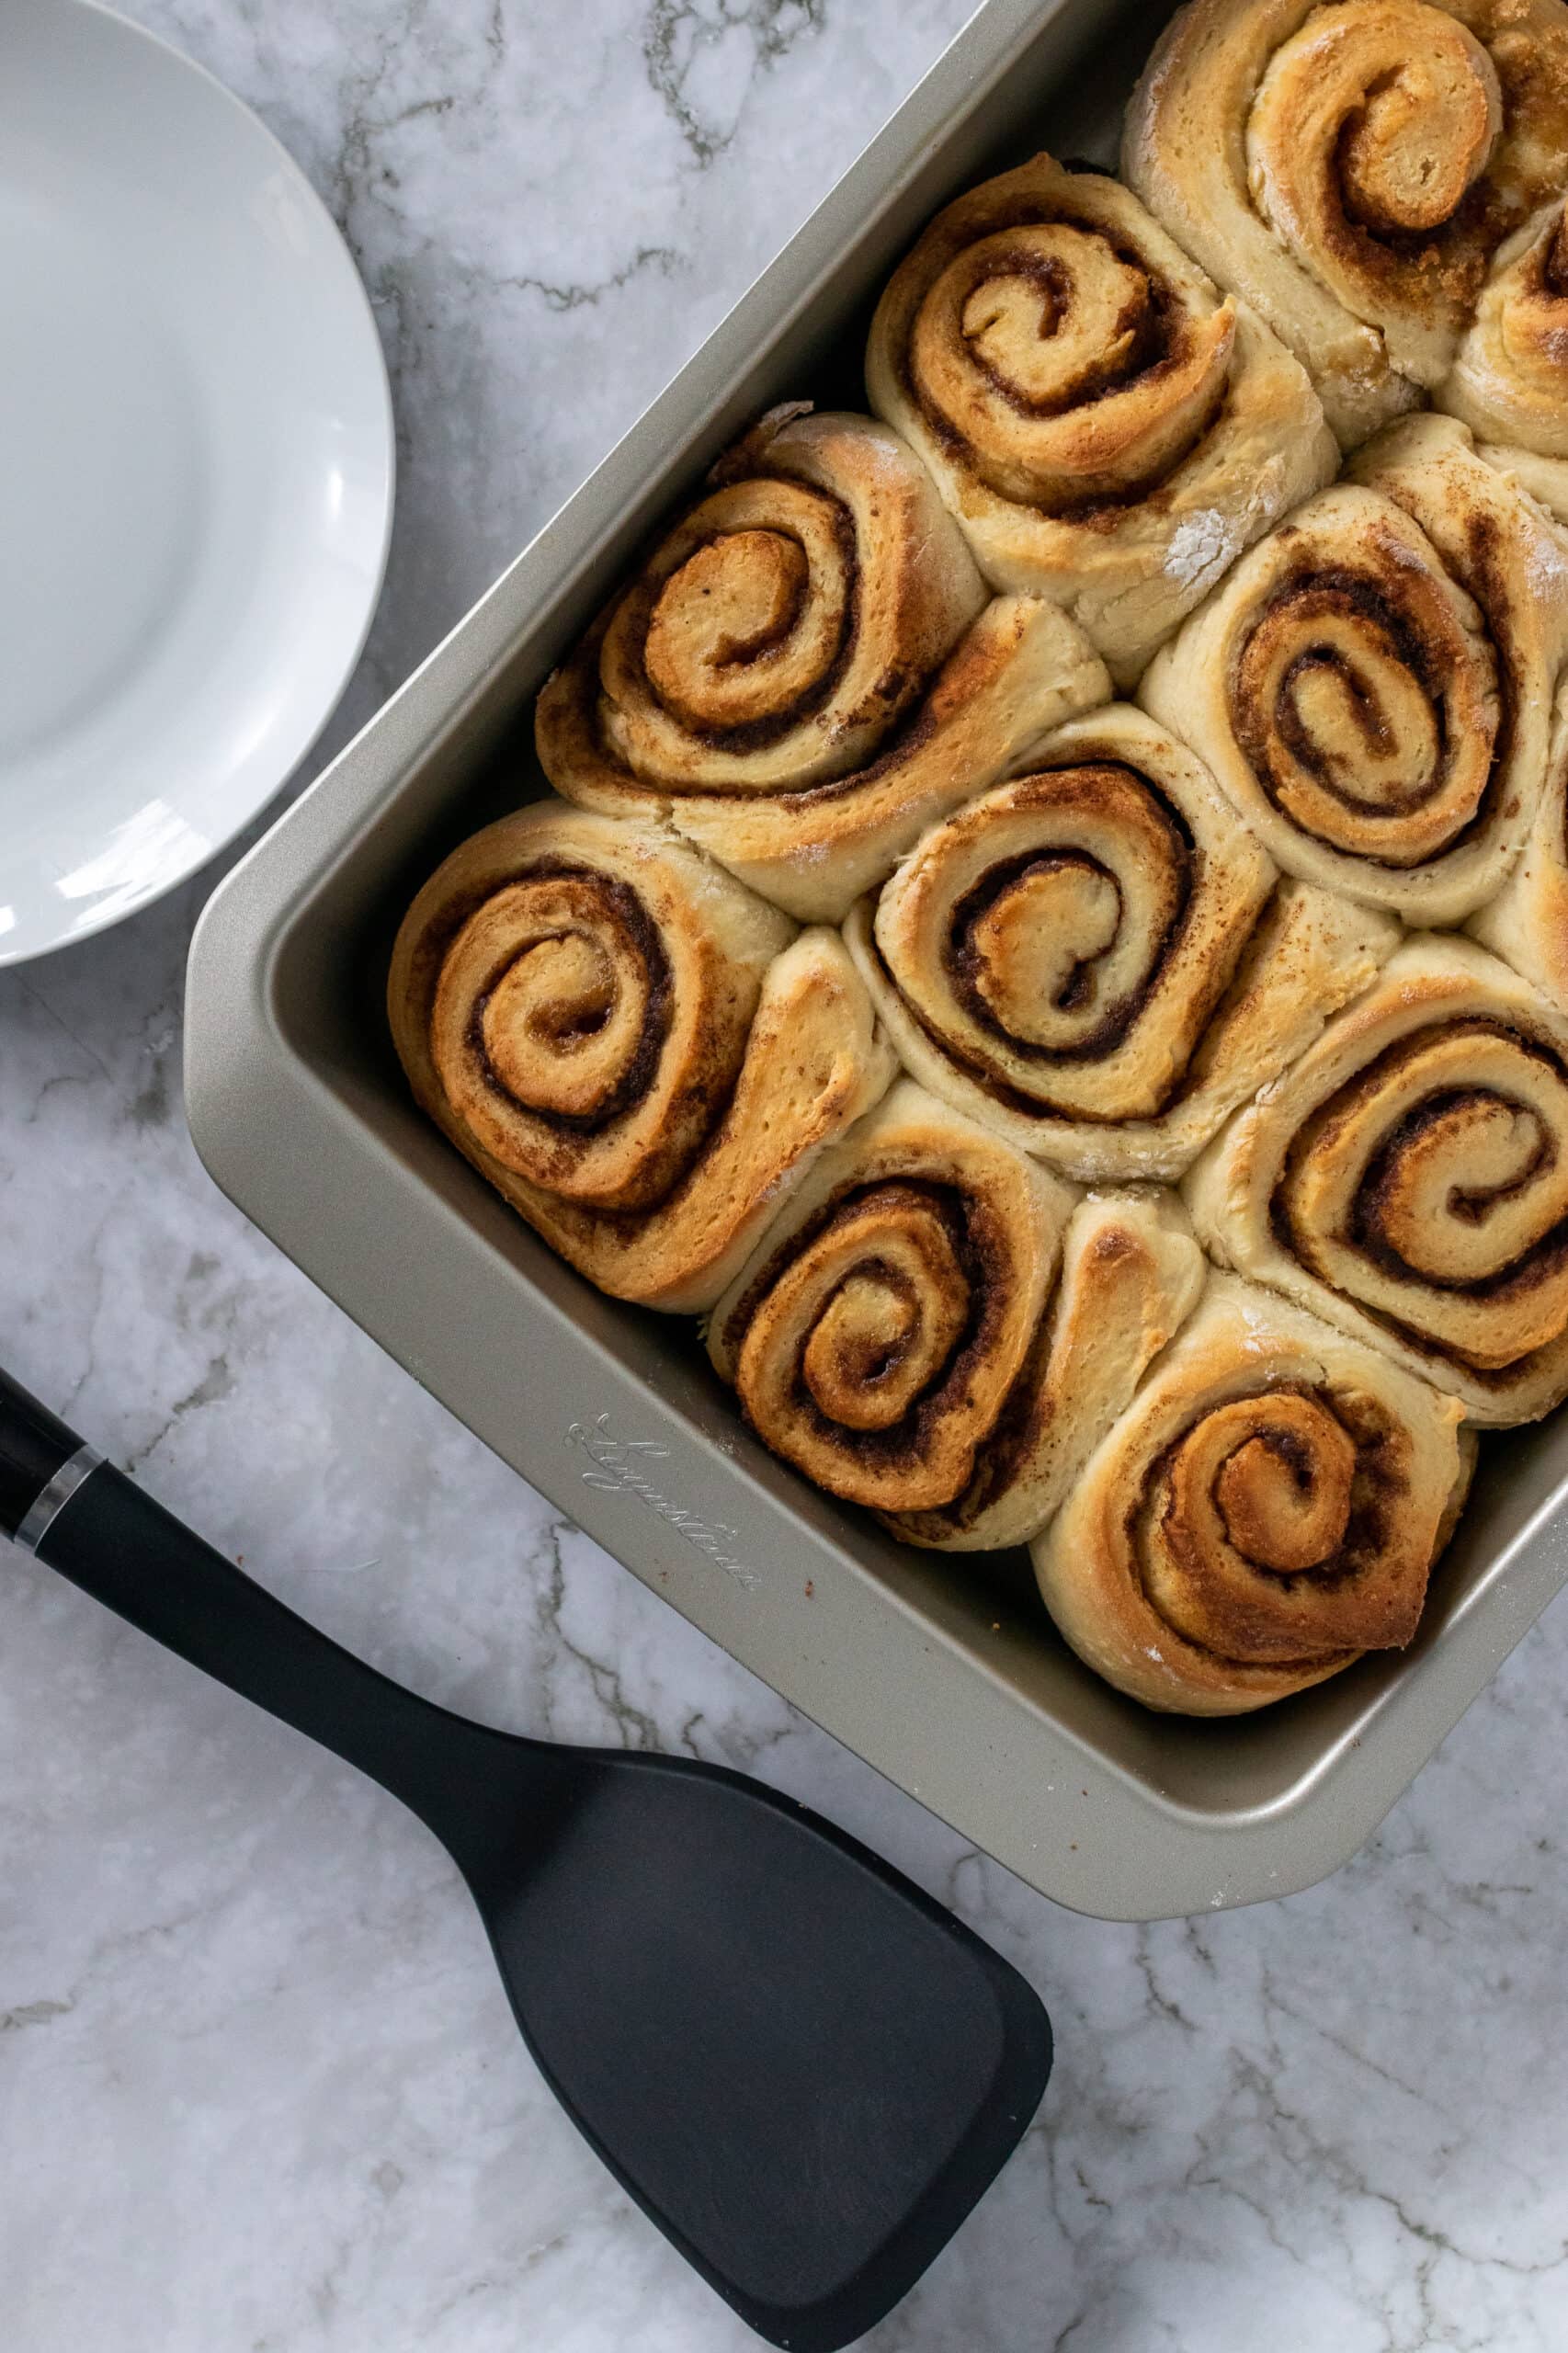 Why You Should Bake Rolls in a Cake Pan